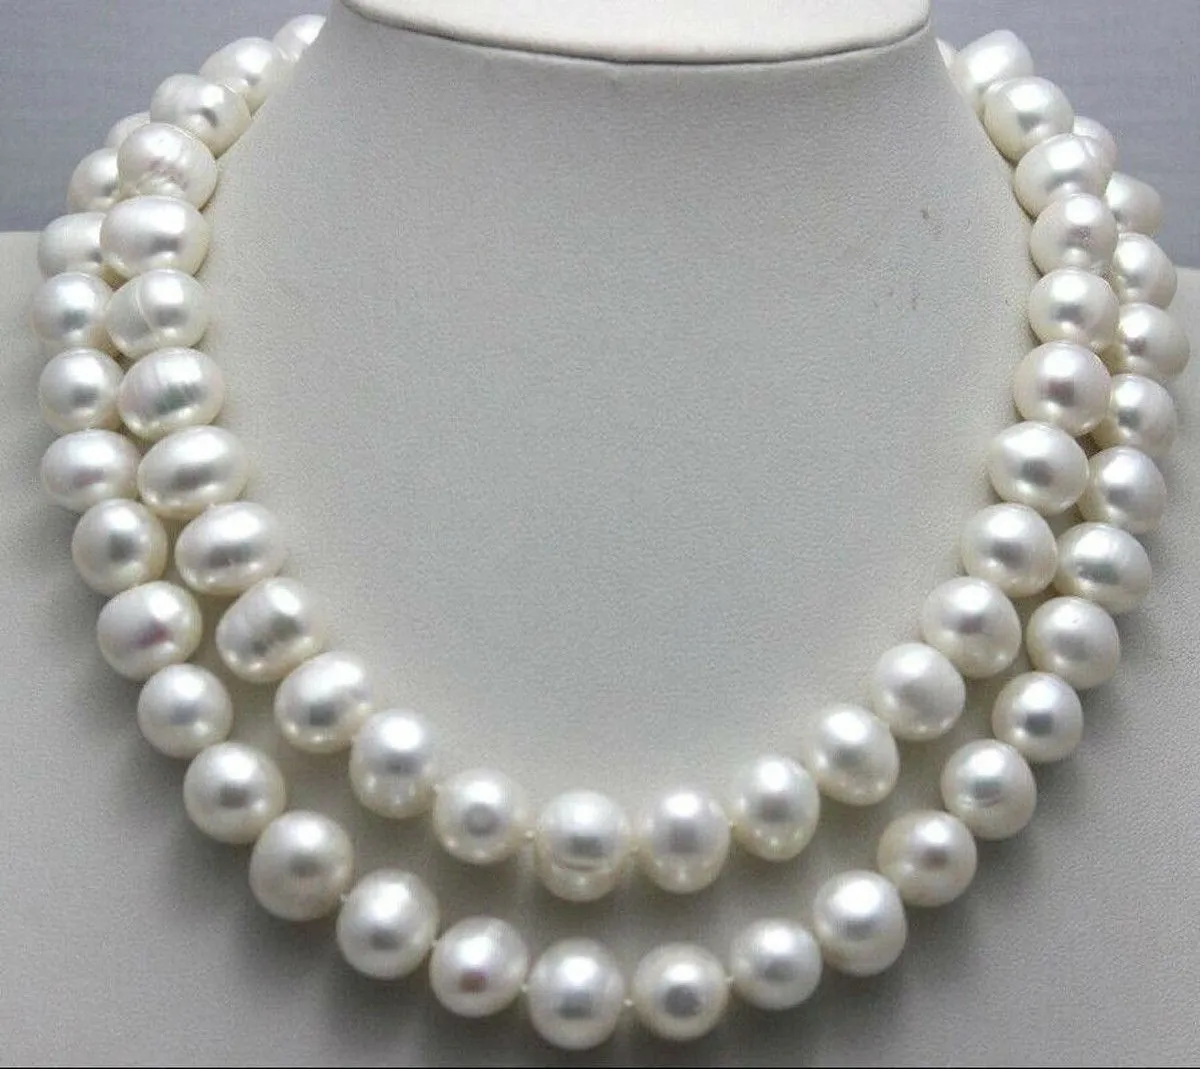 Natural 10-11mm White South Sea Freshwater Cultured Pearl Necklace 42